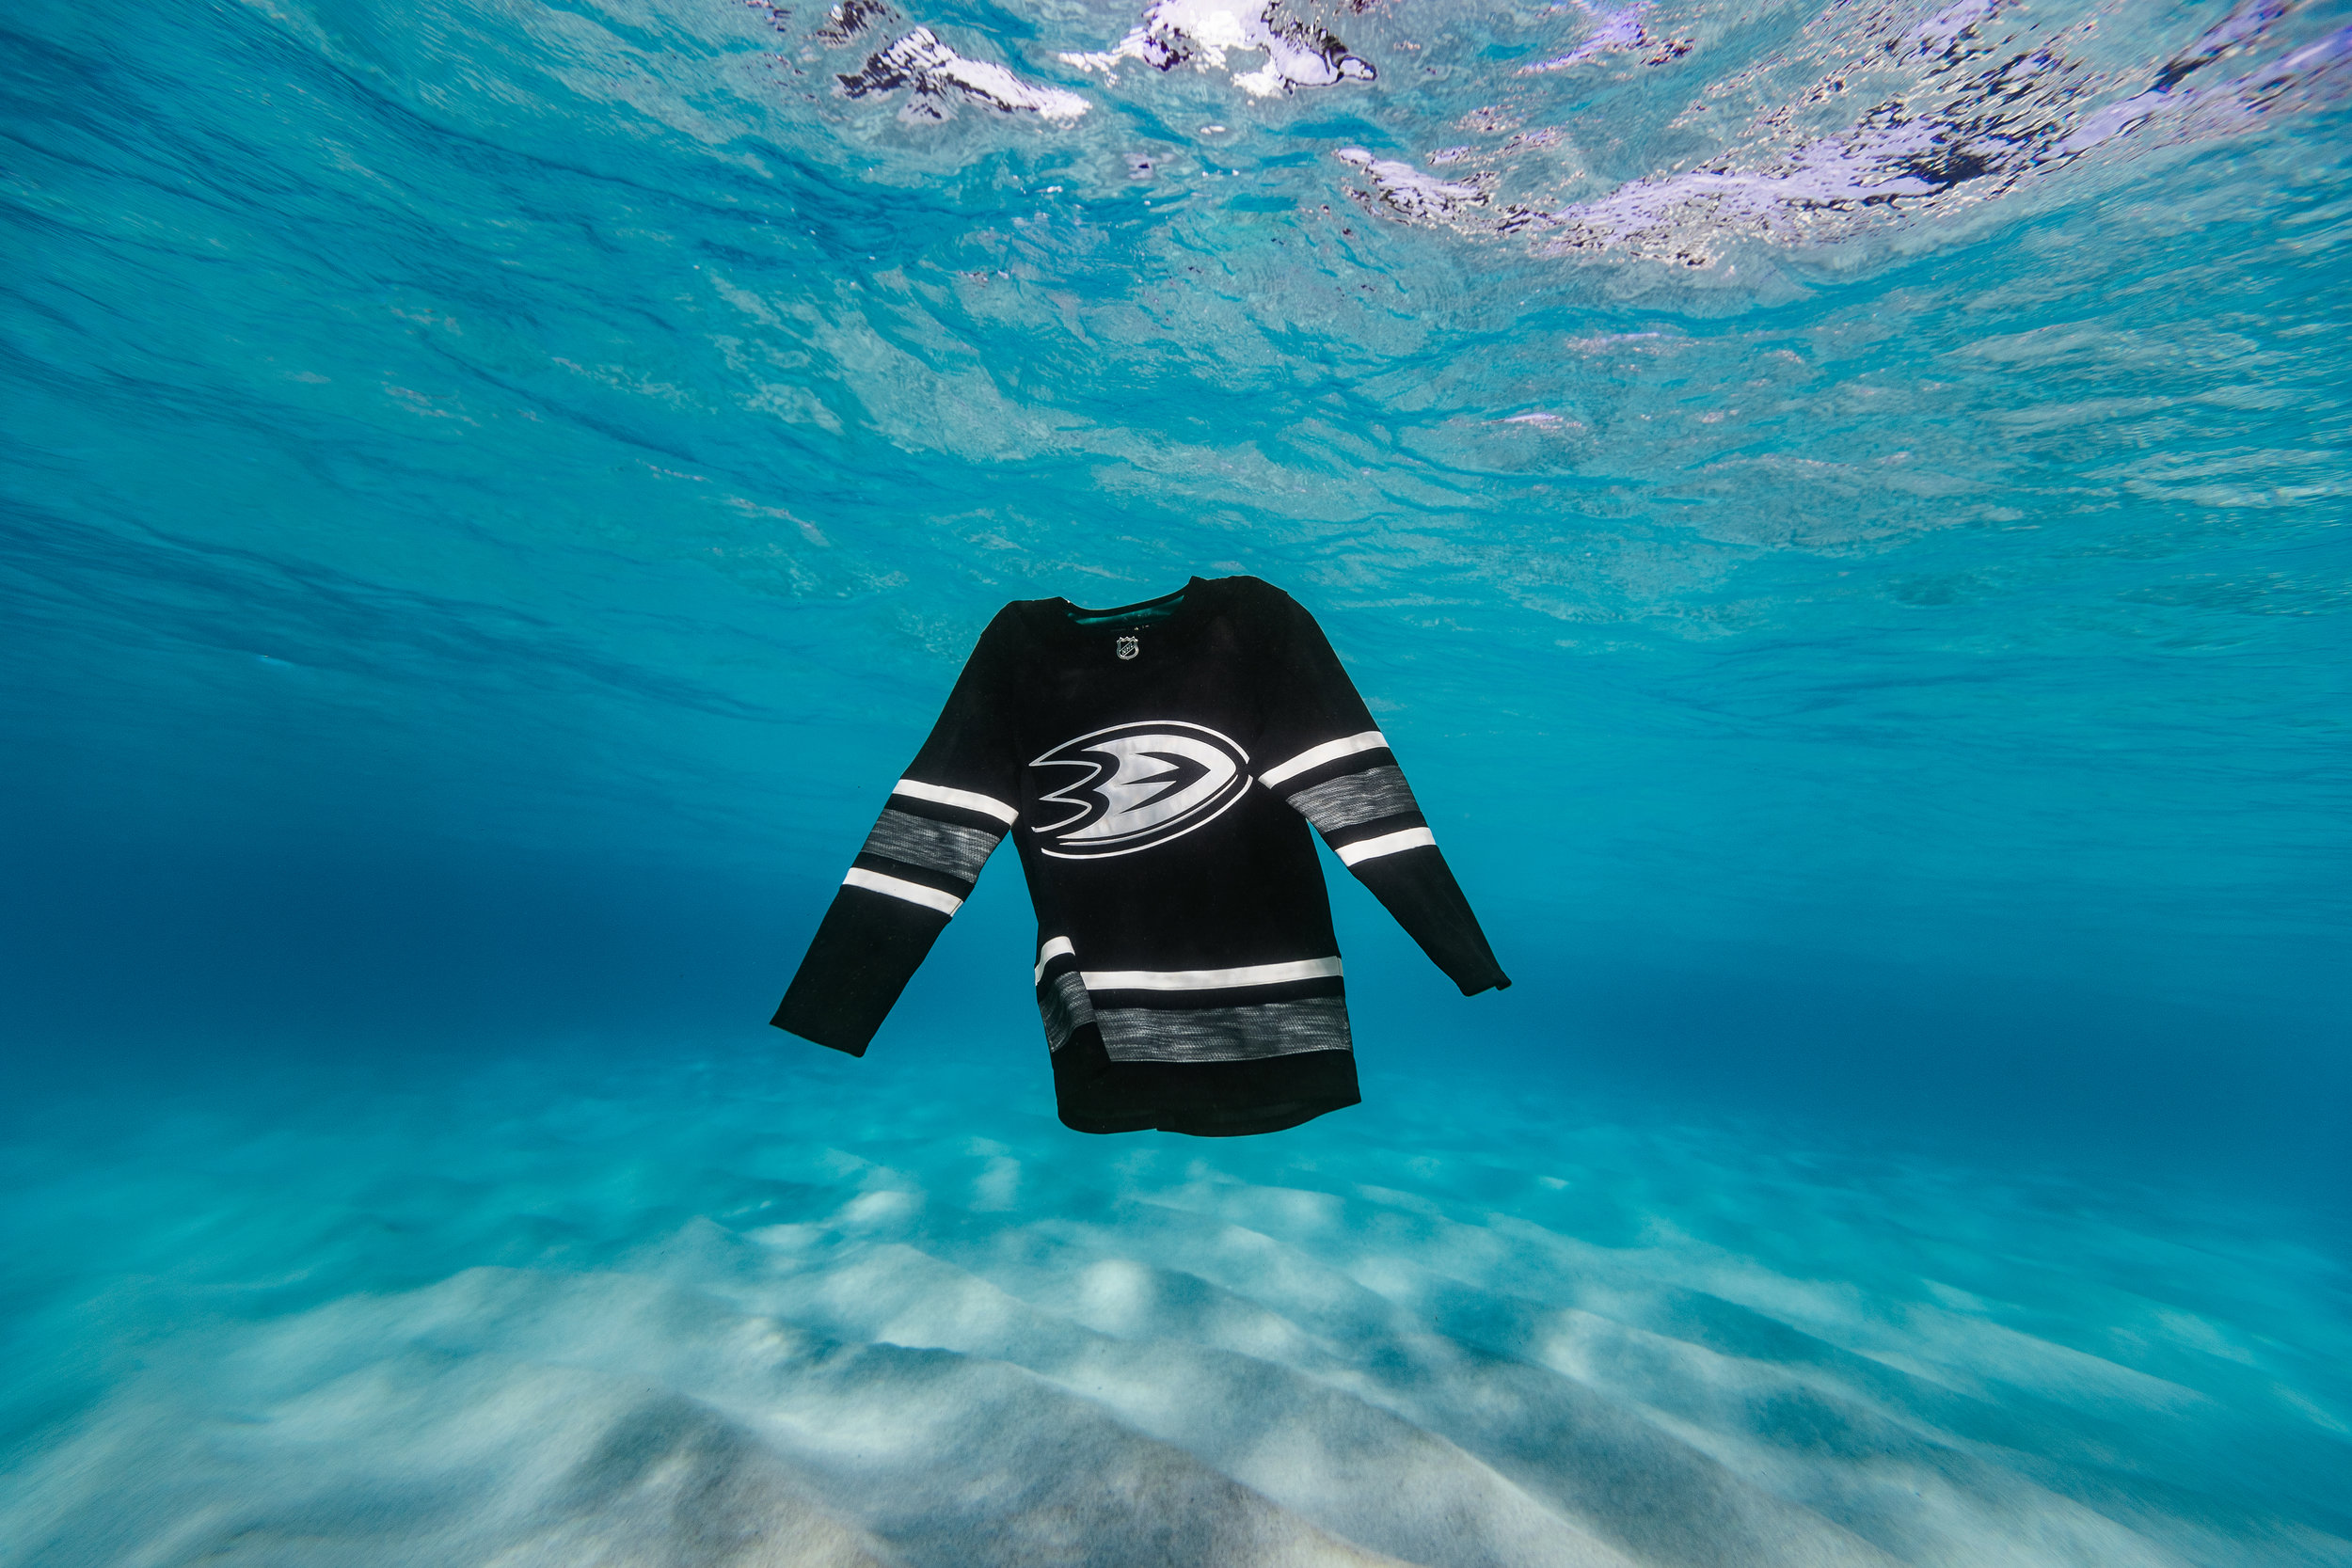 Did you know the 2019 NHL All-Star jerseys were made out of upcycled ocean  debris? - Article - Bardown